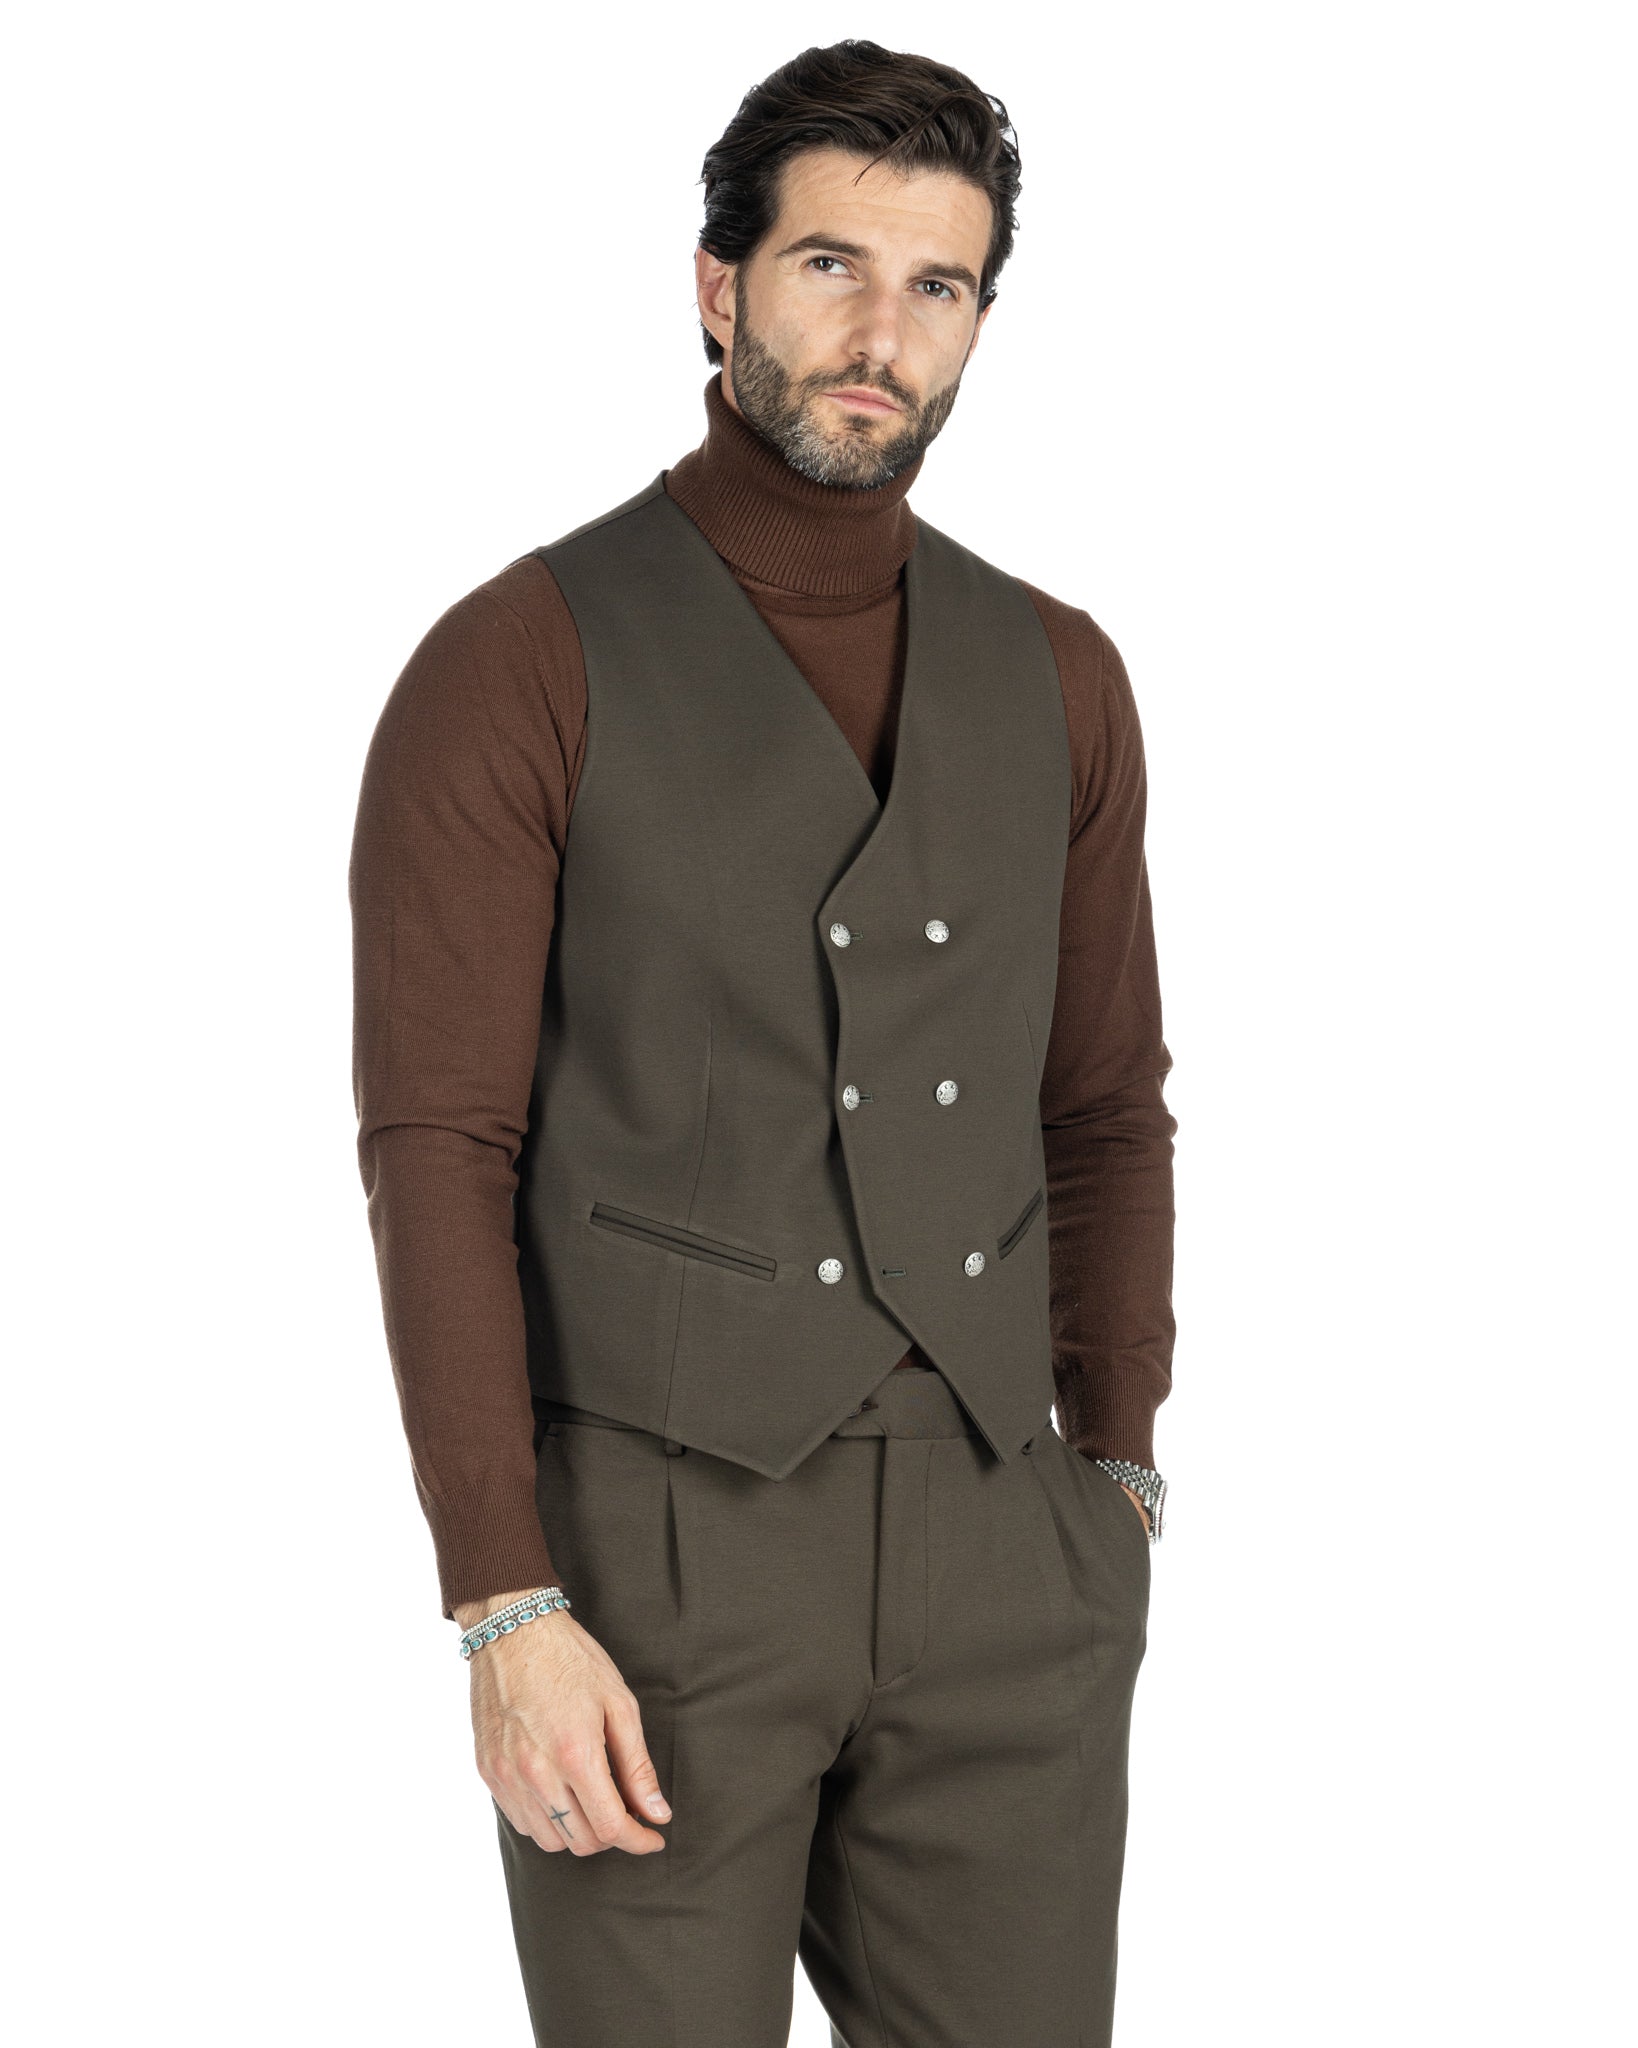 Mustang - double-breasted waistcoat in military milan stitch